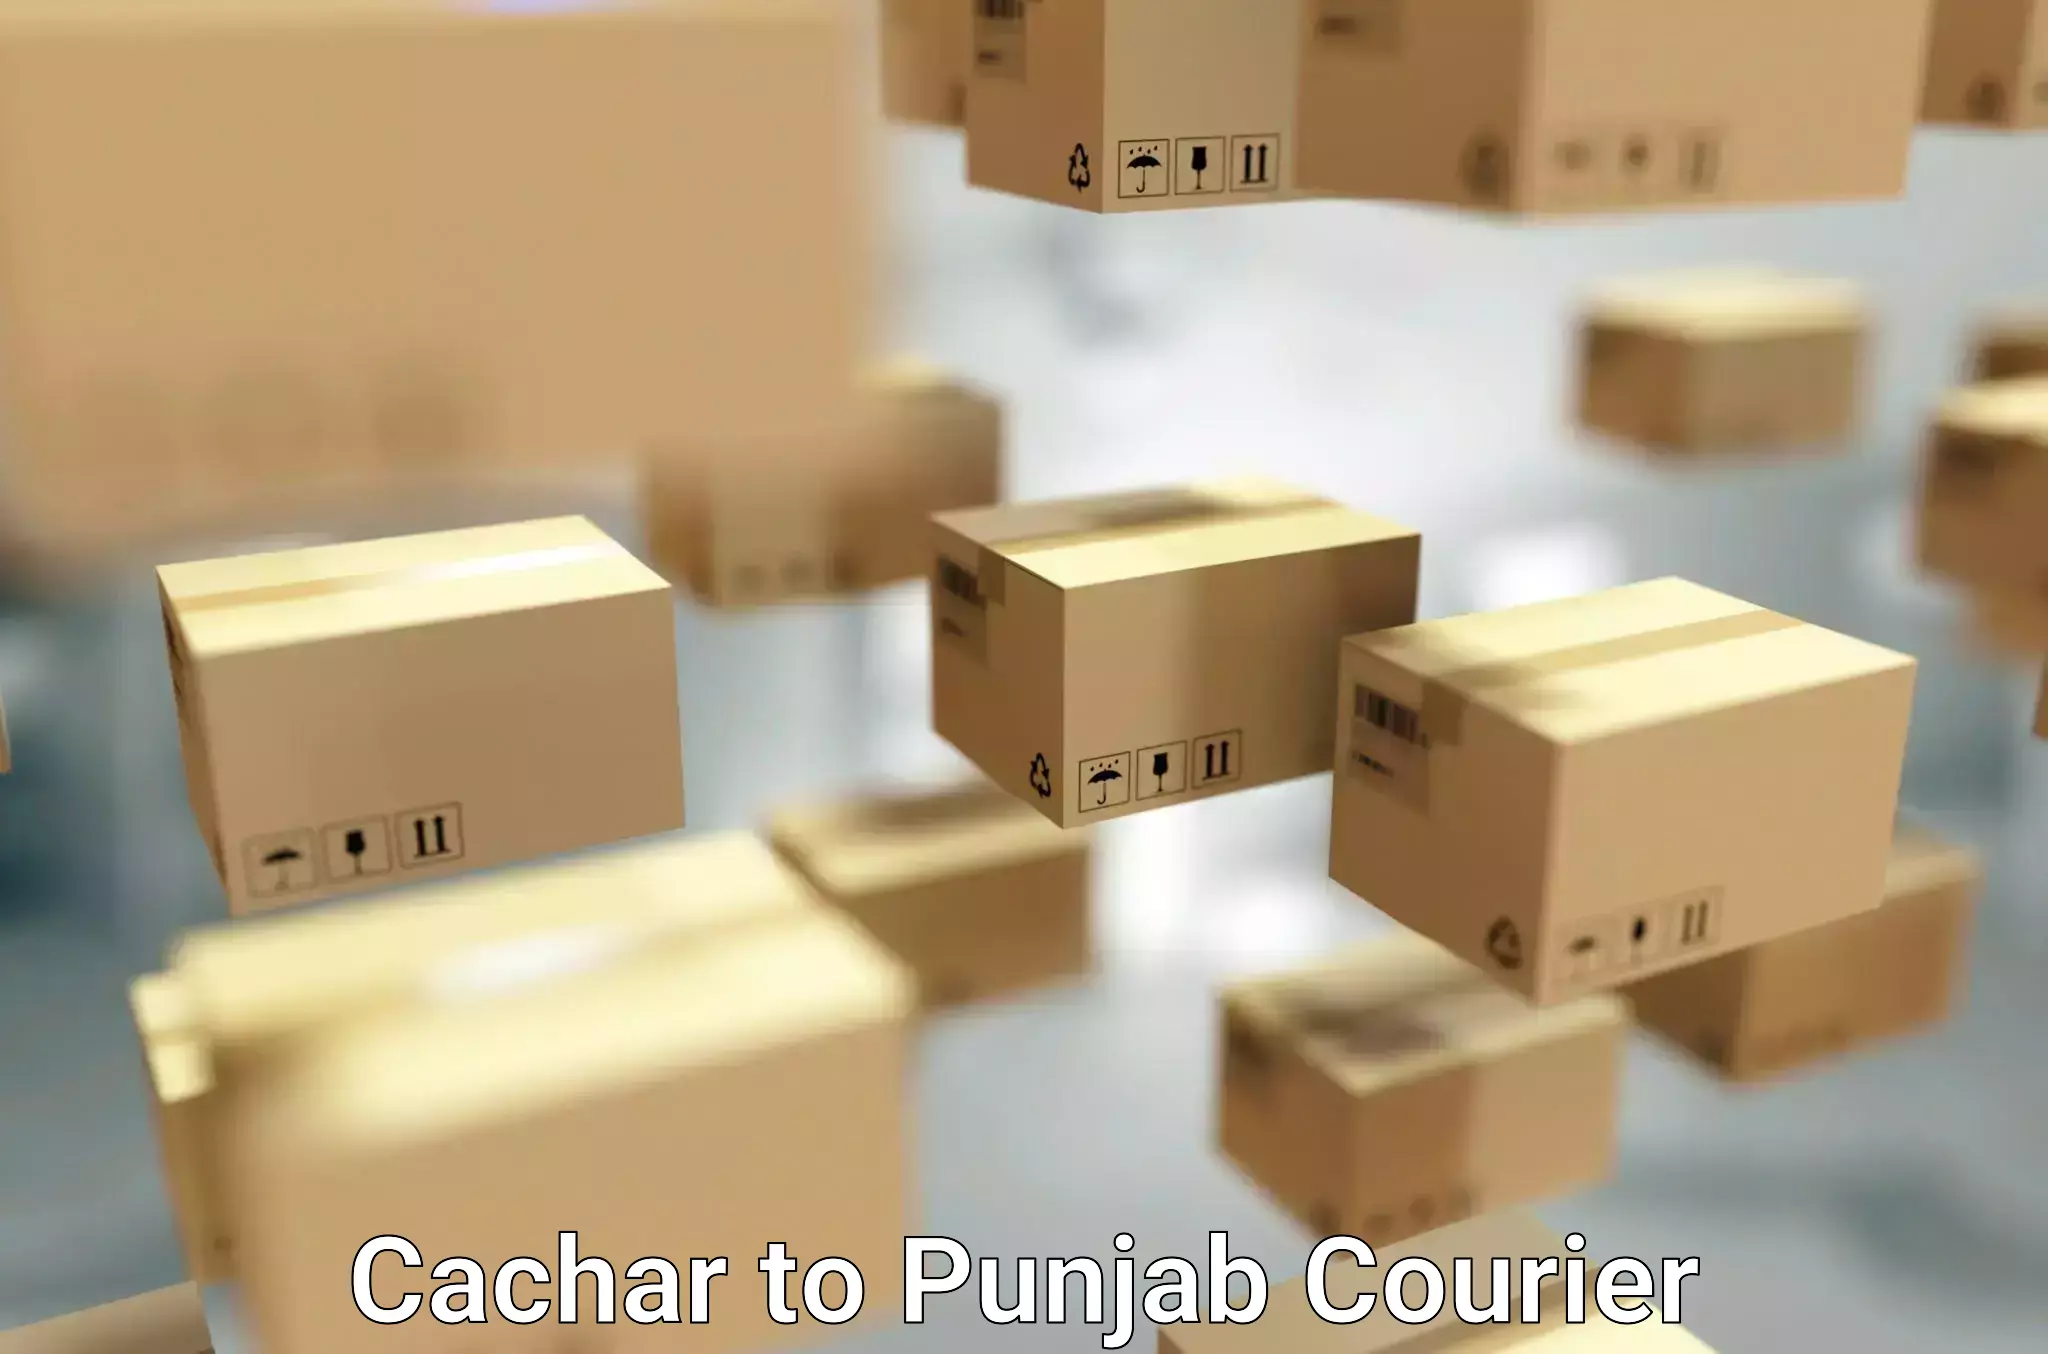 Residential moving experts Cachar to Jalandhar